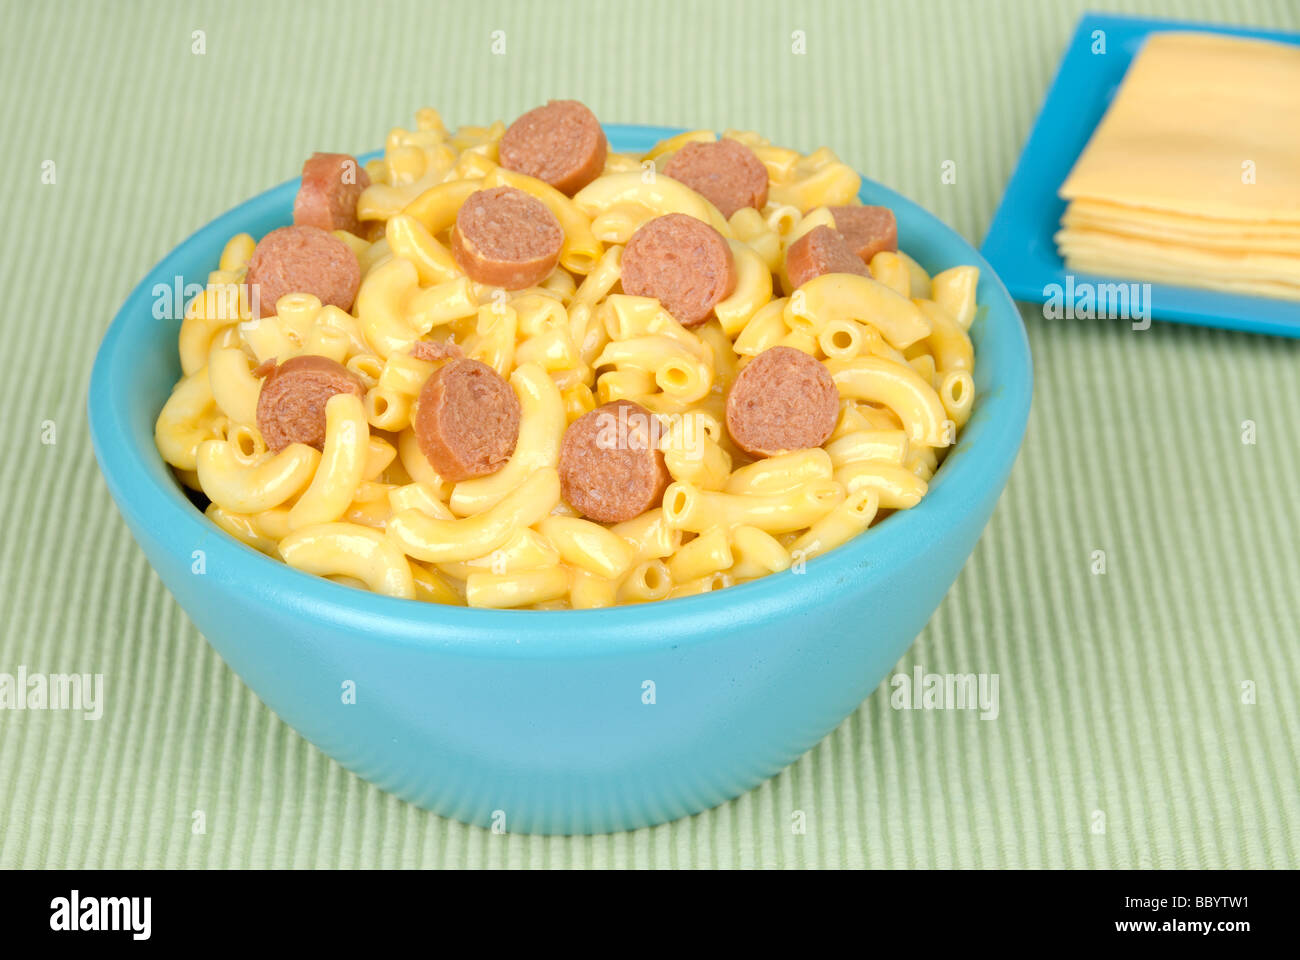 A bowl of macaroni and cheese with hotdogs bits and sliced cheese Stock Photo